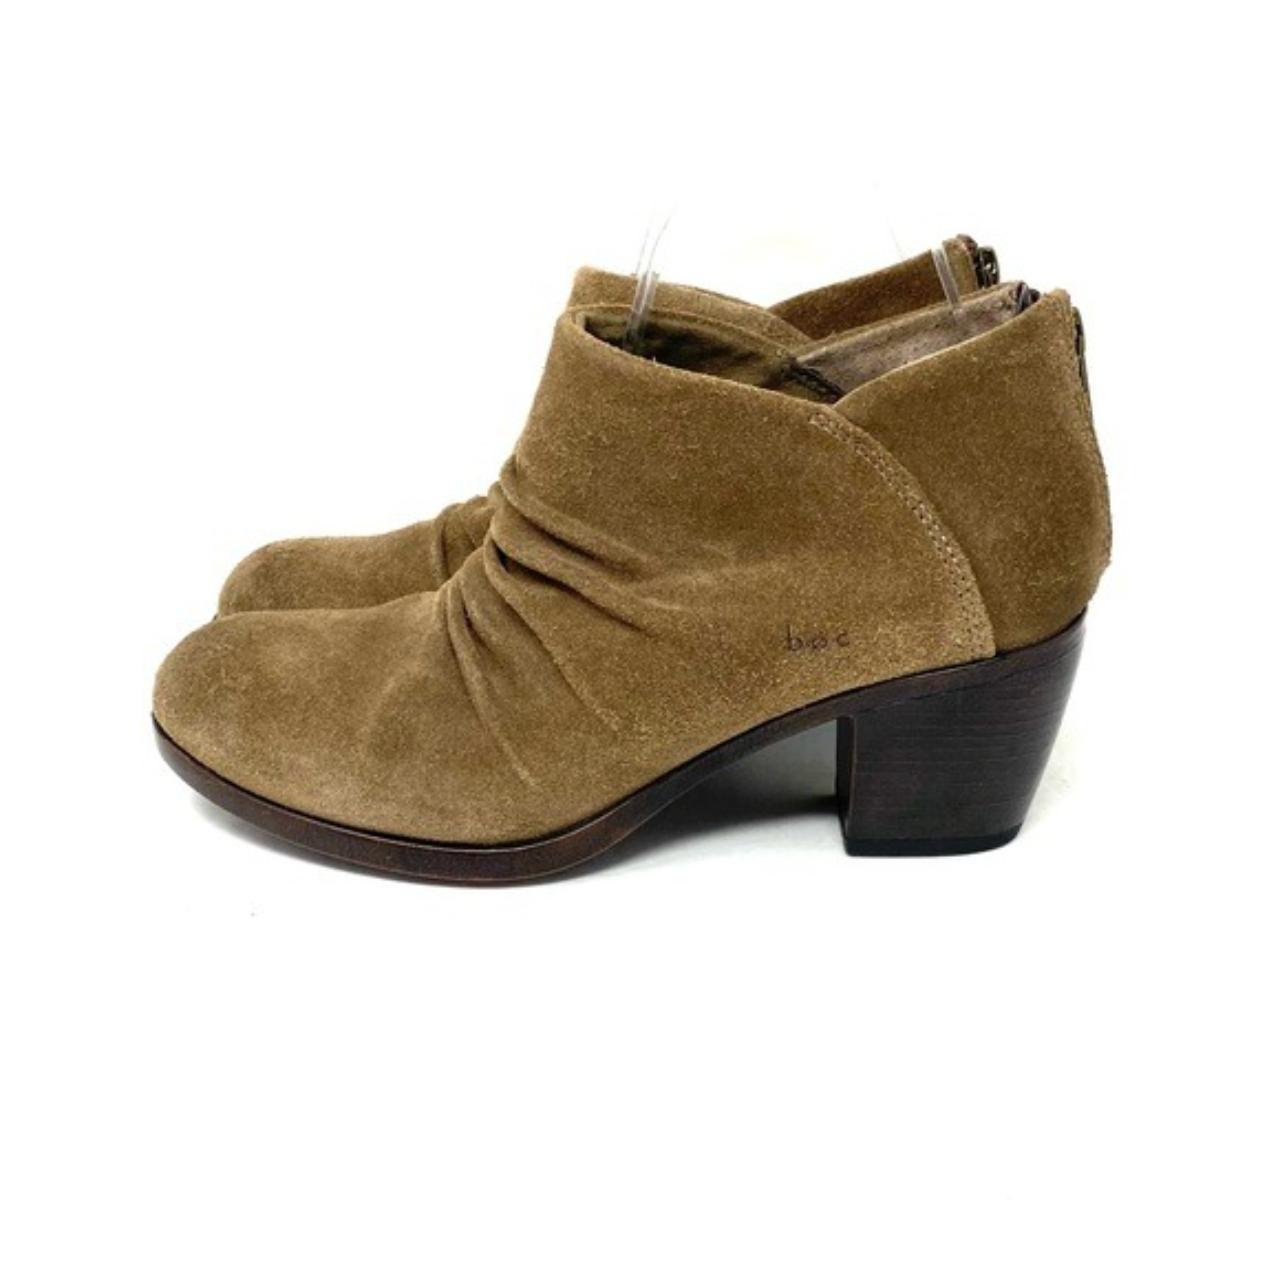 b.o.c. taupe suede ankle booties. Women's size 8.5.... - Depop